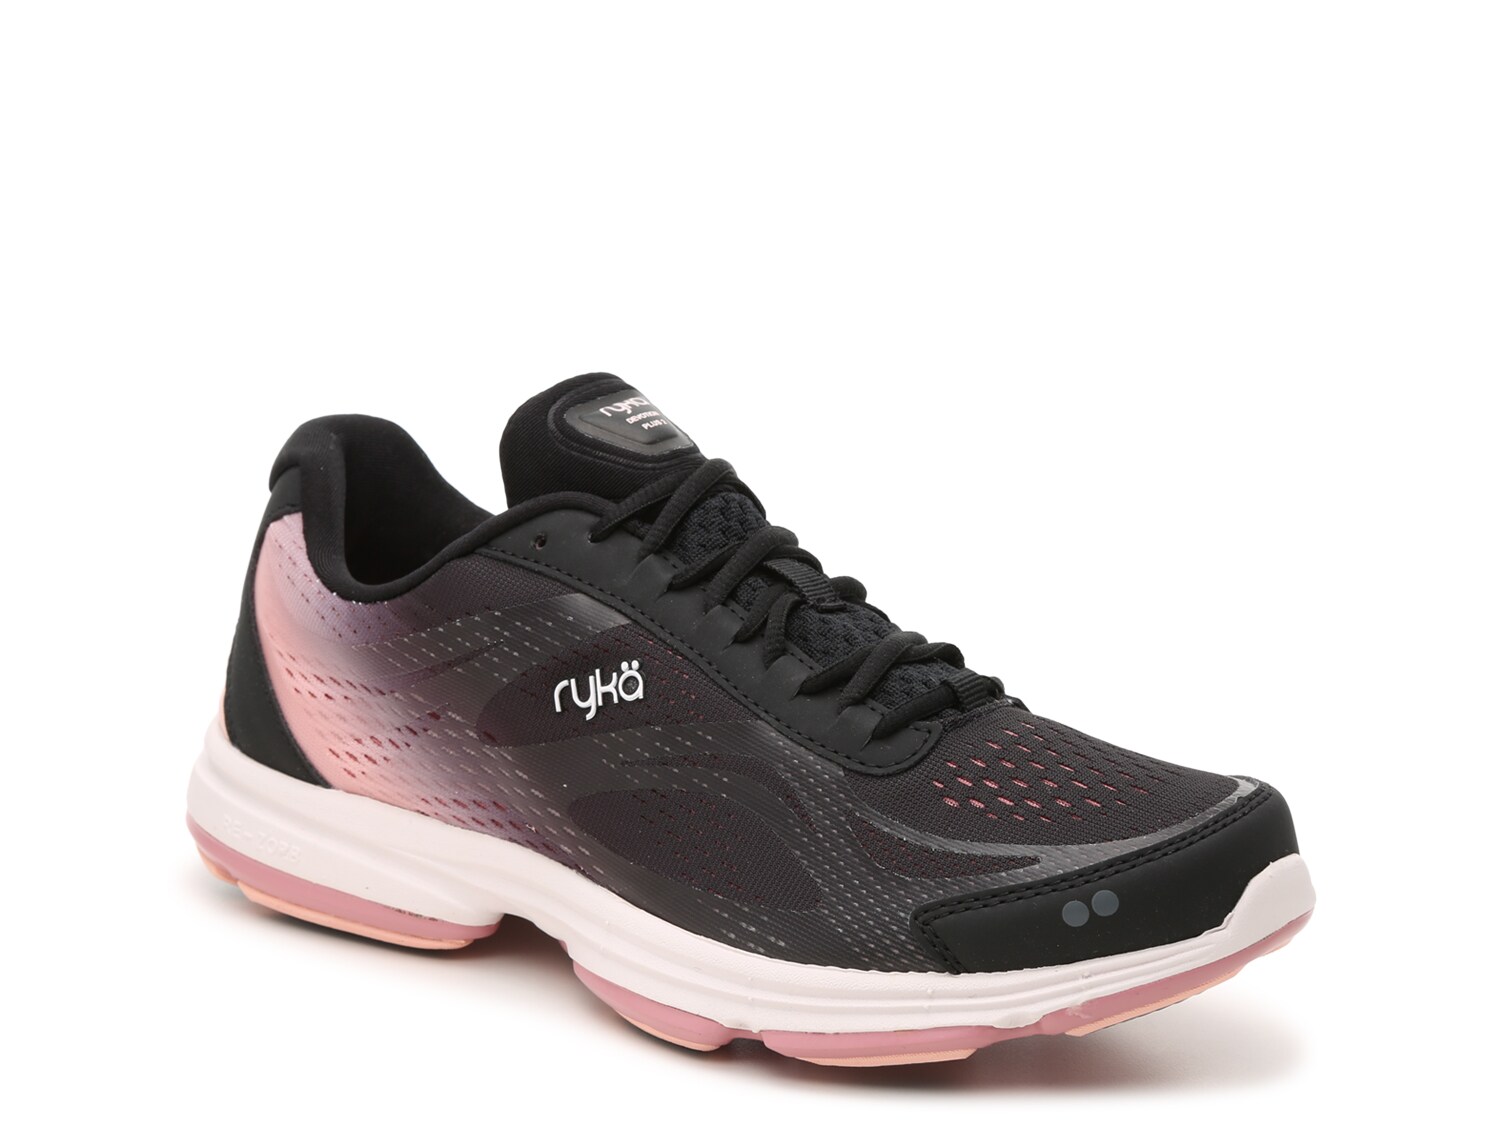 ryka shoe outlet store